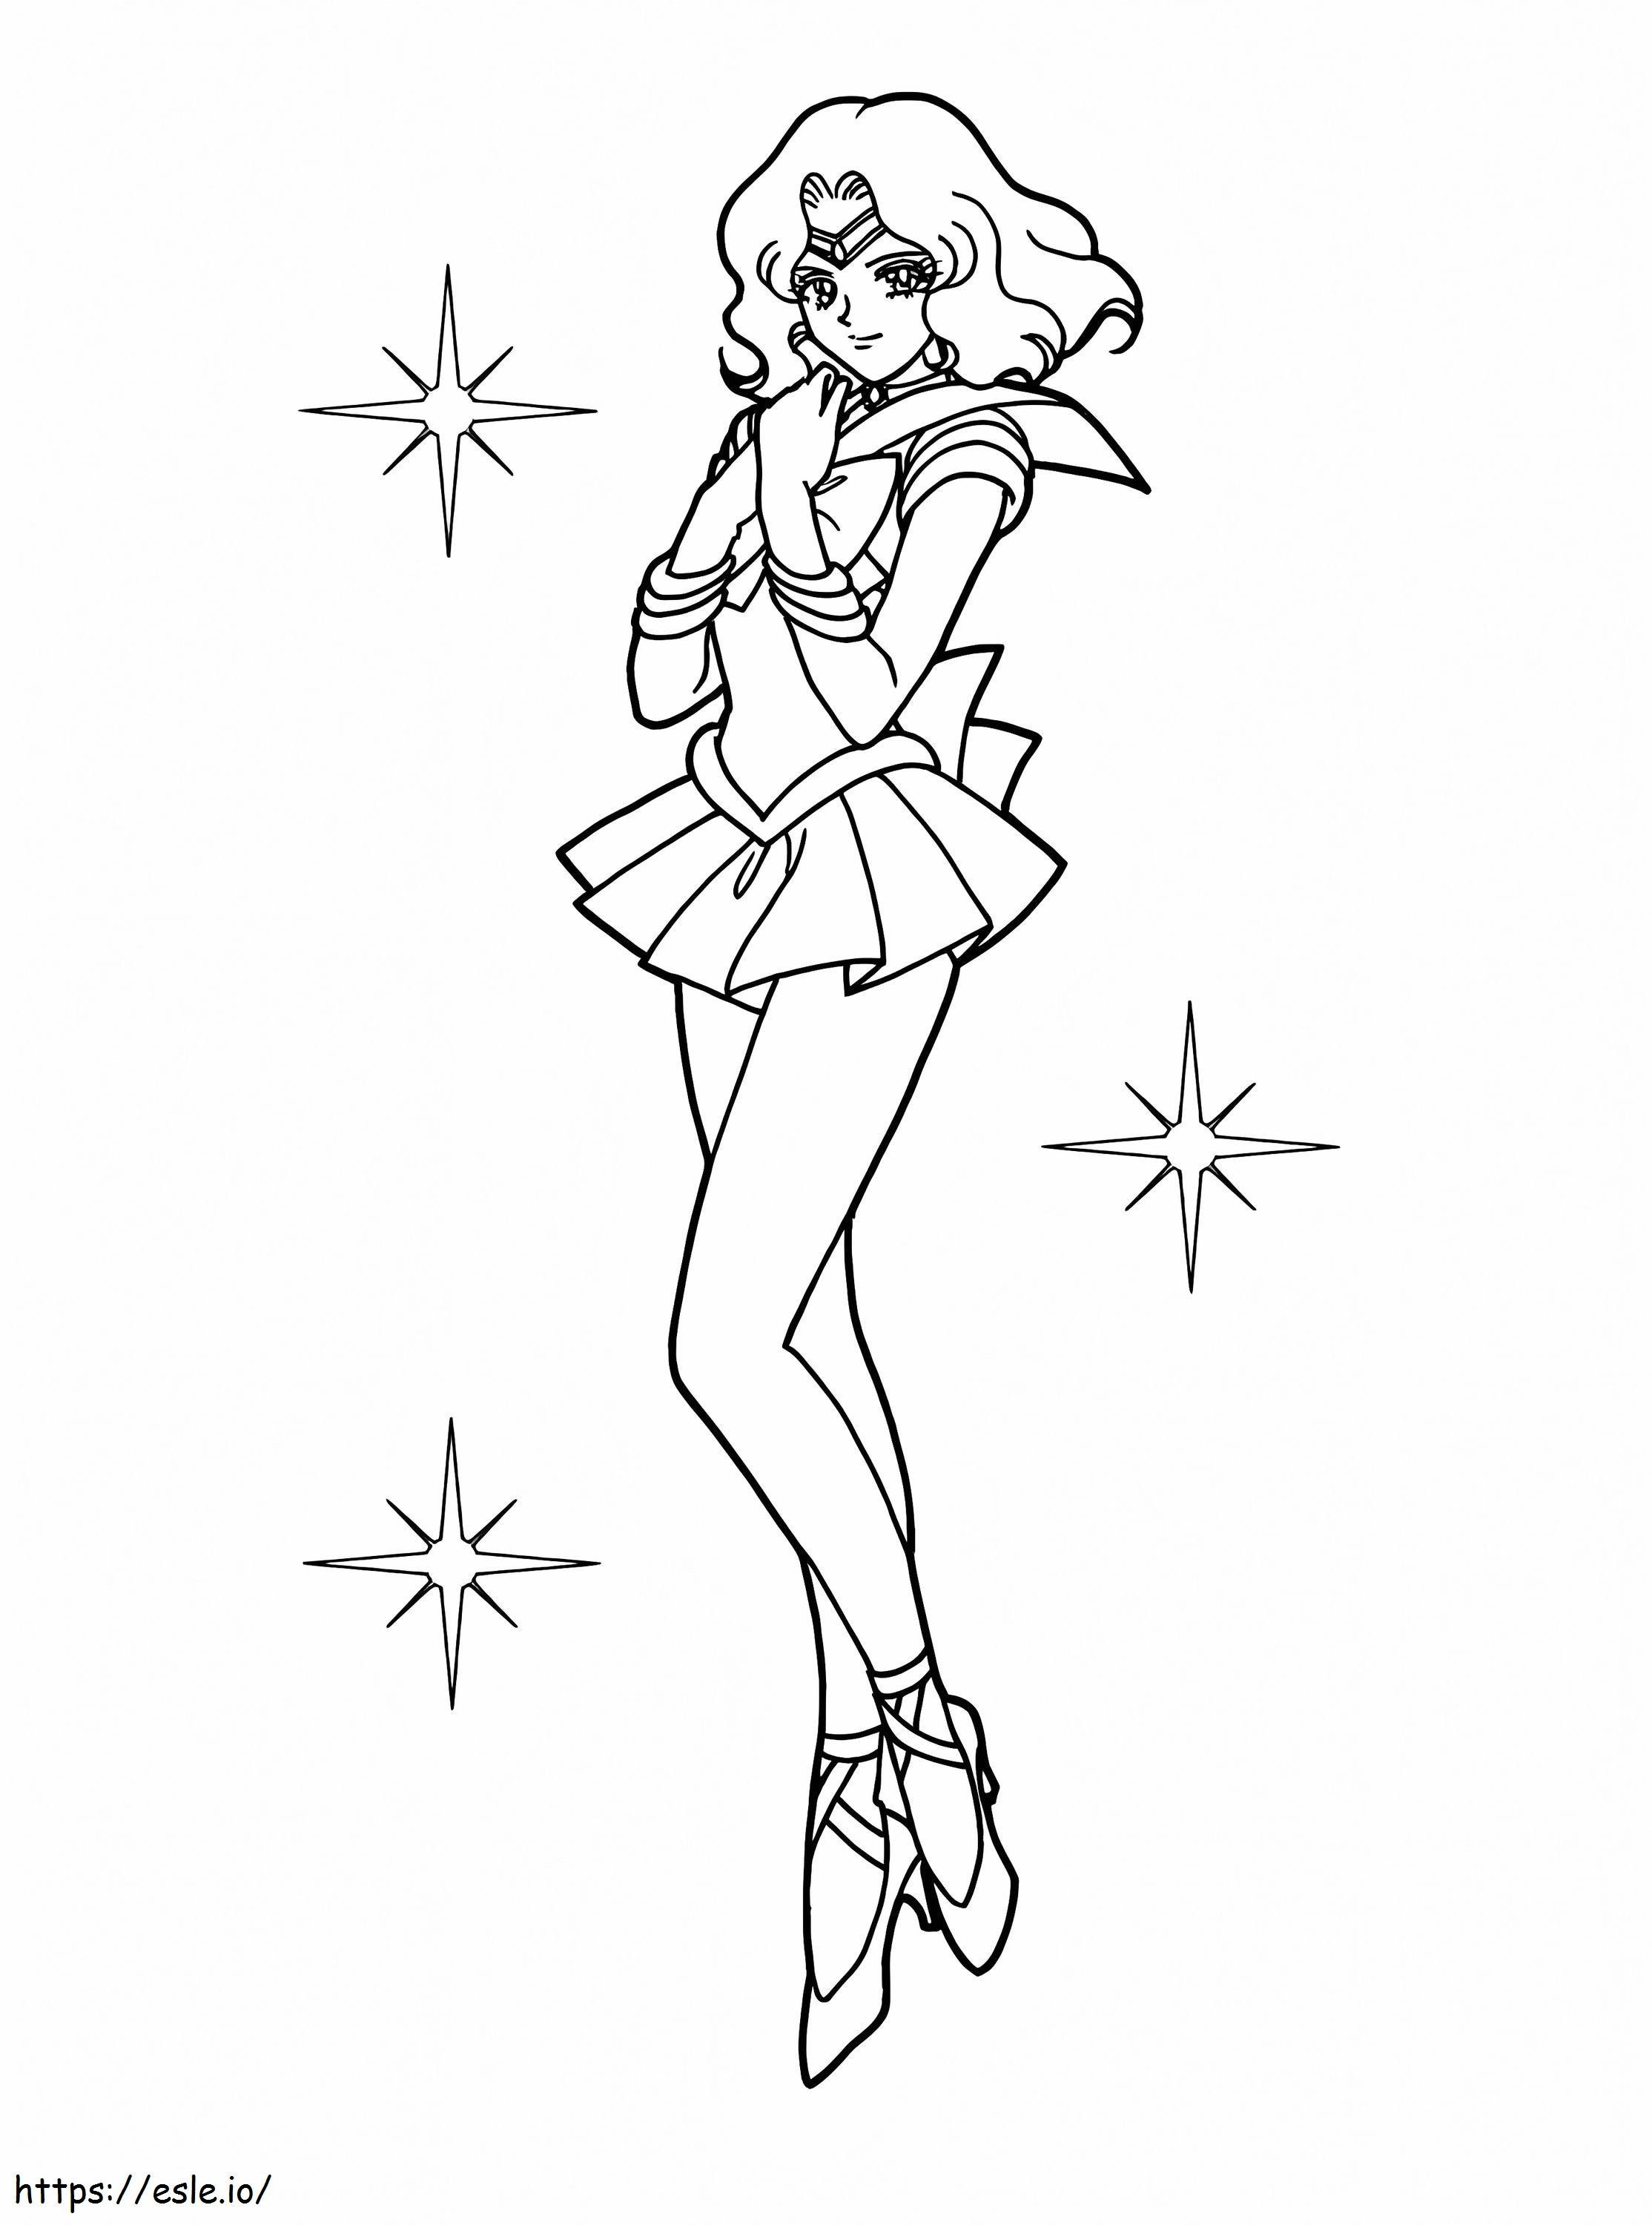 Amazing Sailor Neptune coloring page